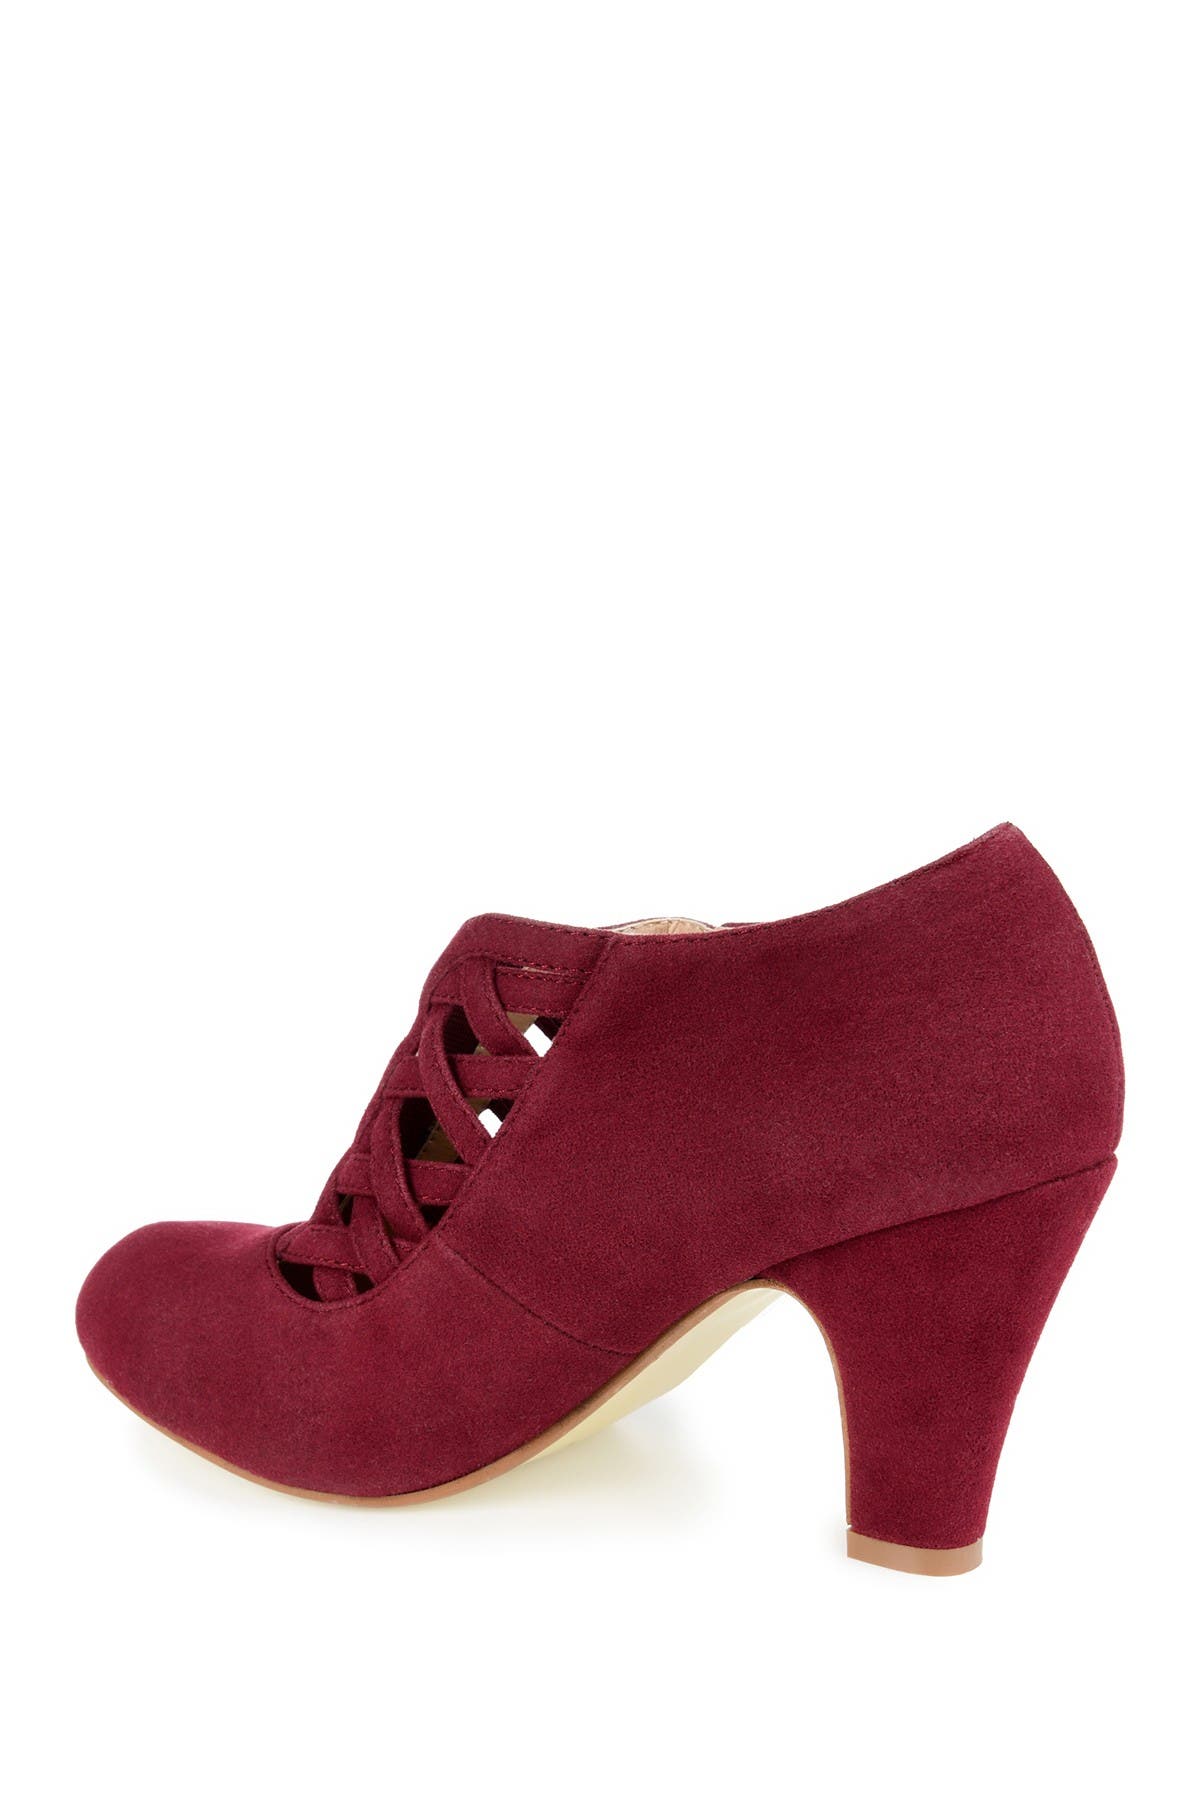 Journee Collection Piper Caged Ankle Bootie In Dark Red4